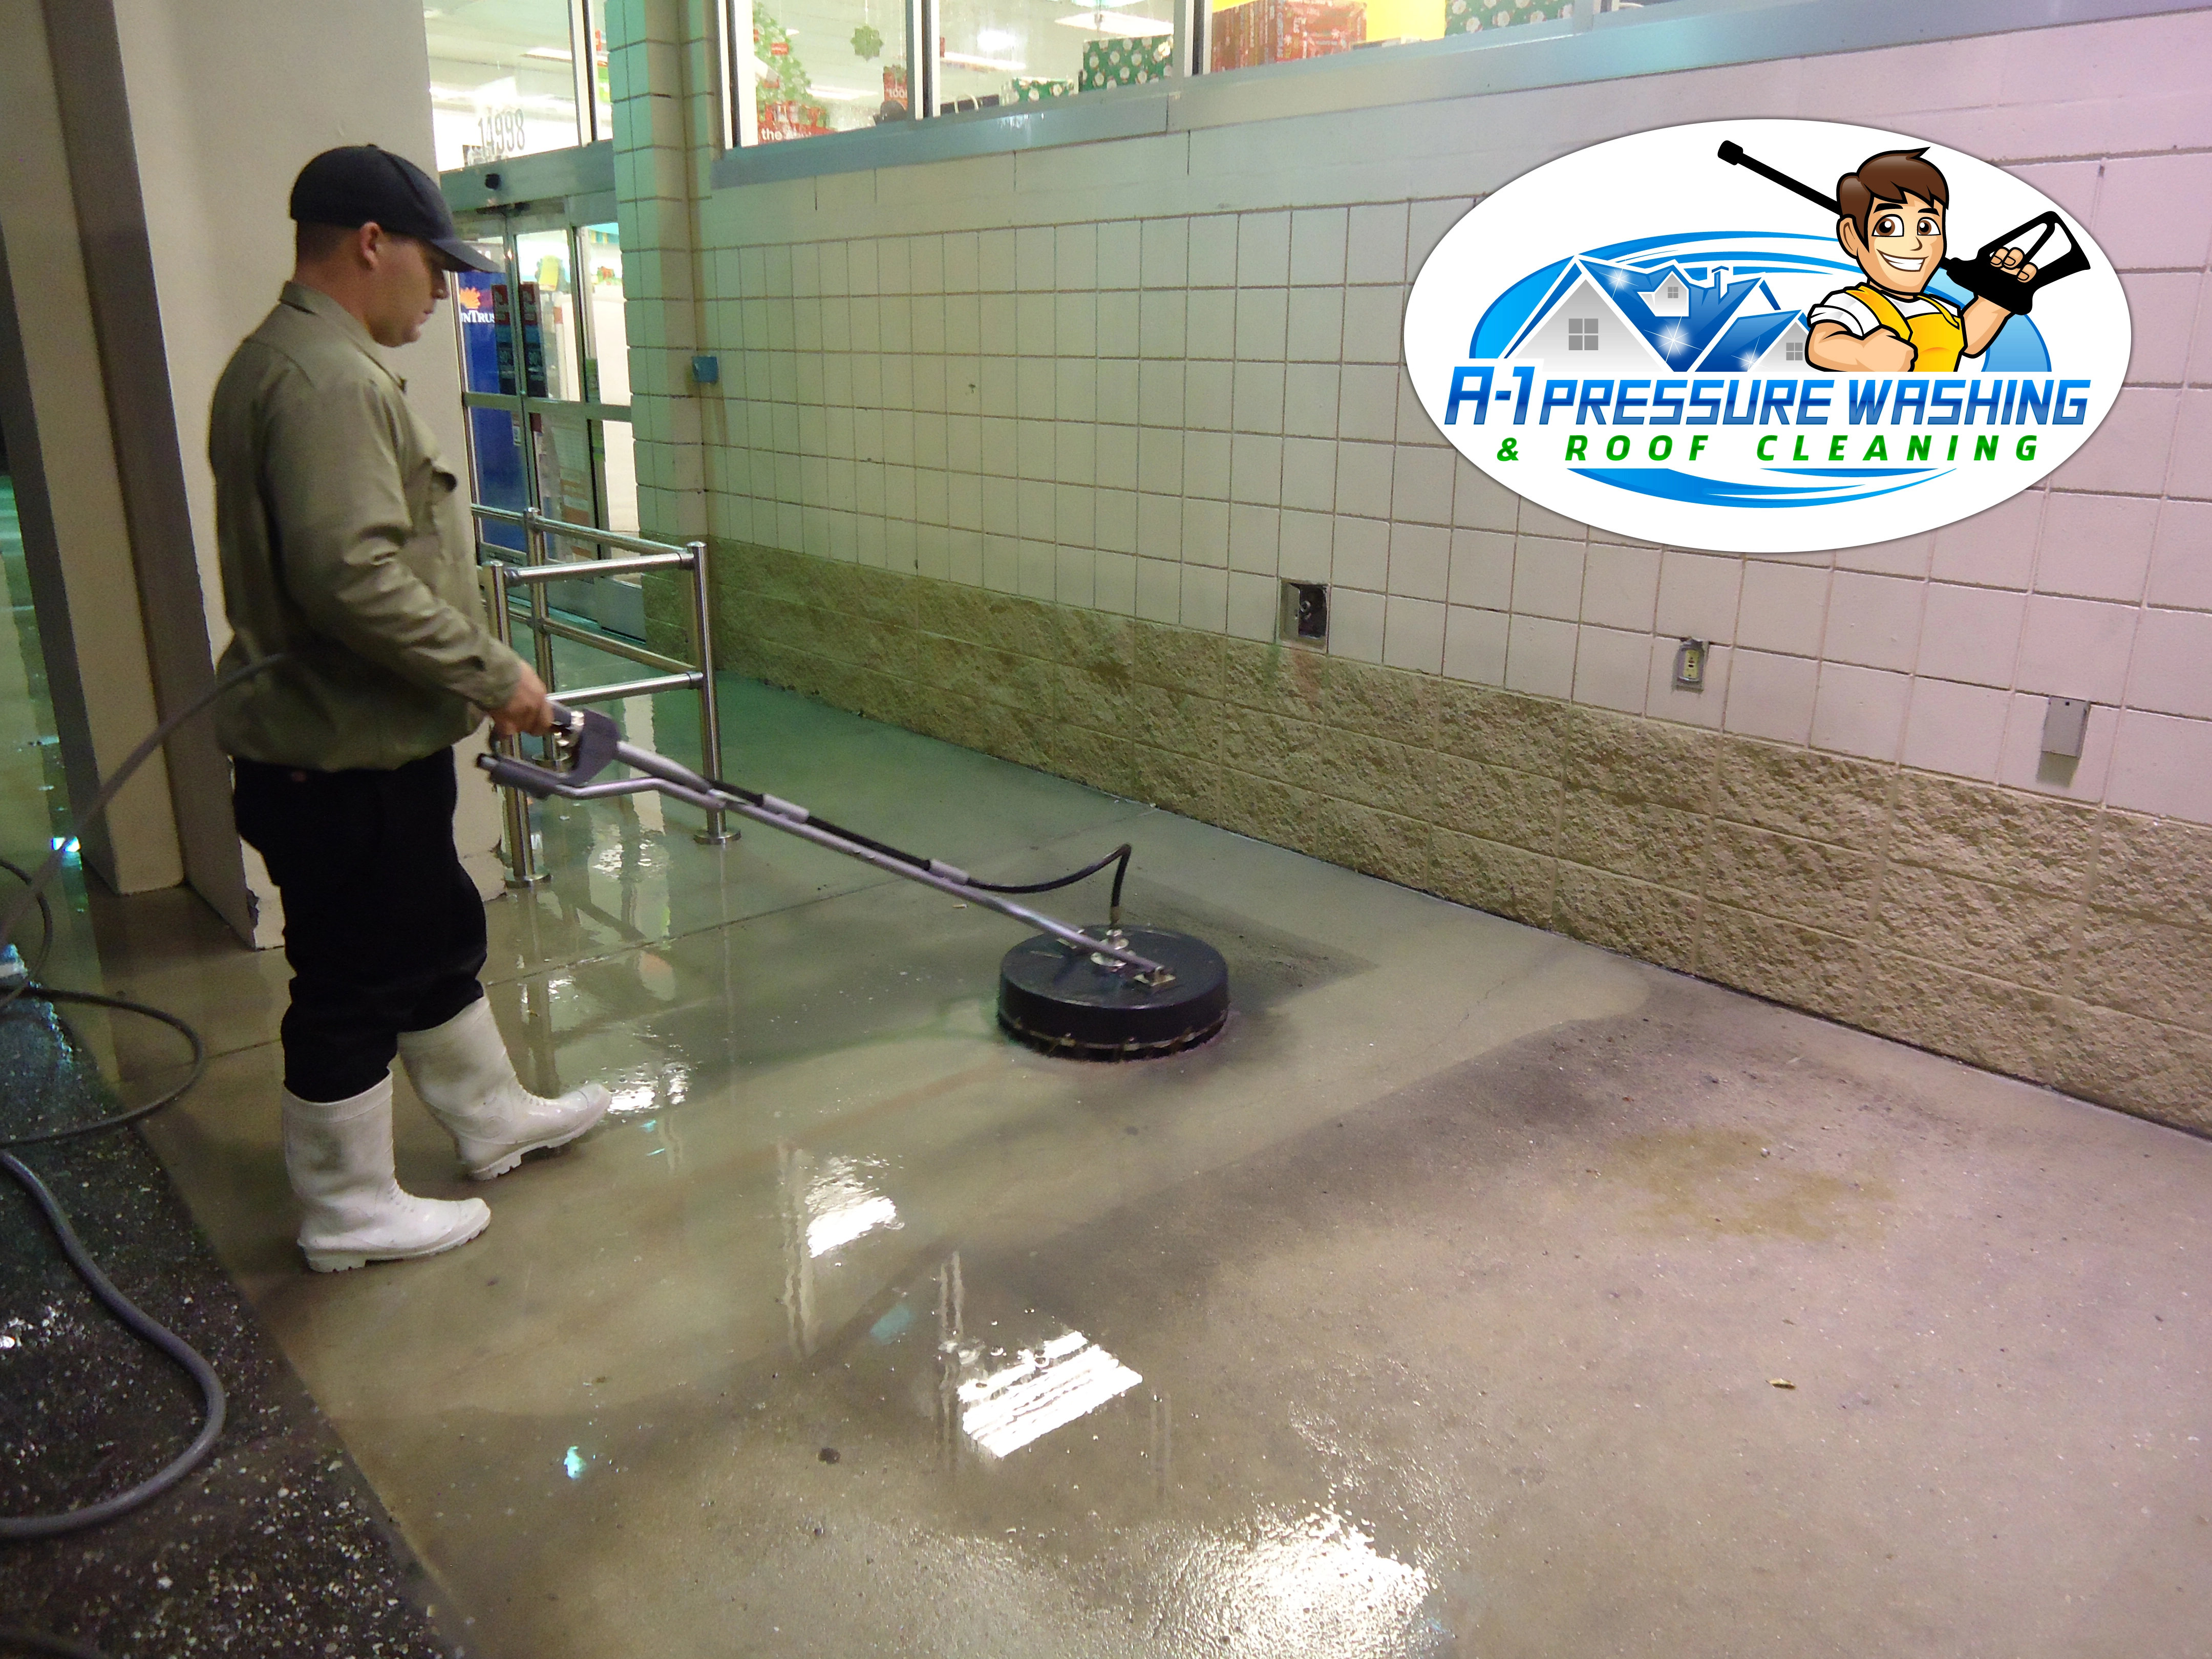 Commercial Pressure Cleaning Services | A-1 Pressure Washing & Roof Cleaning | 941-815-8454 